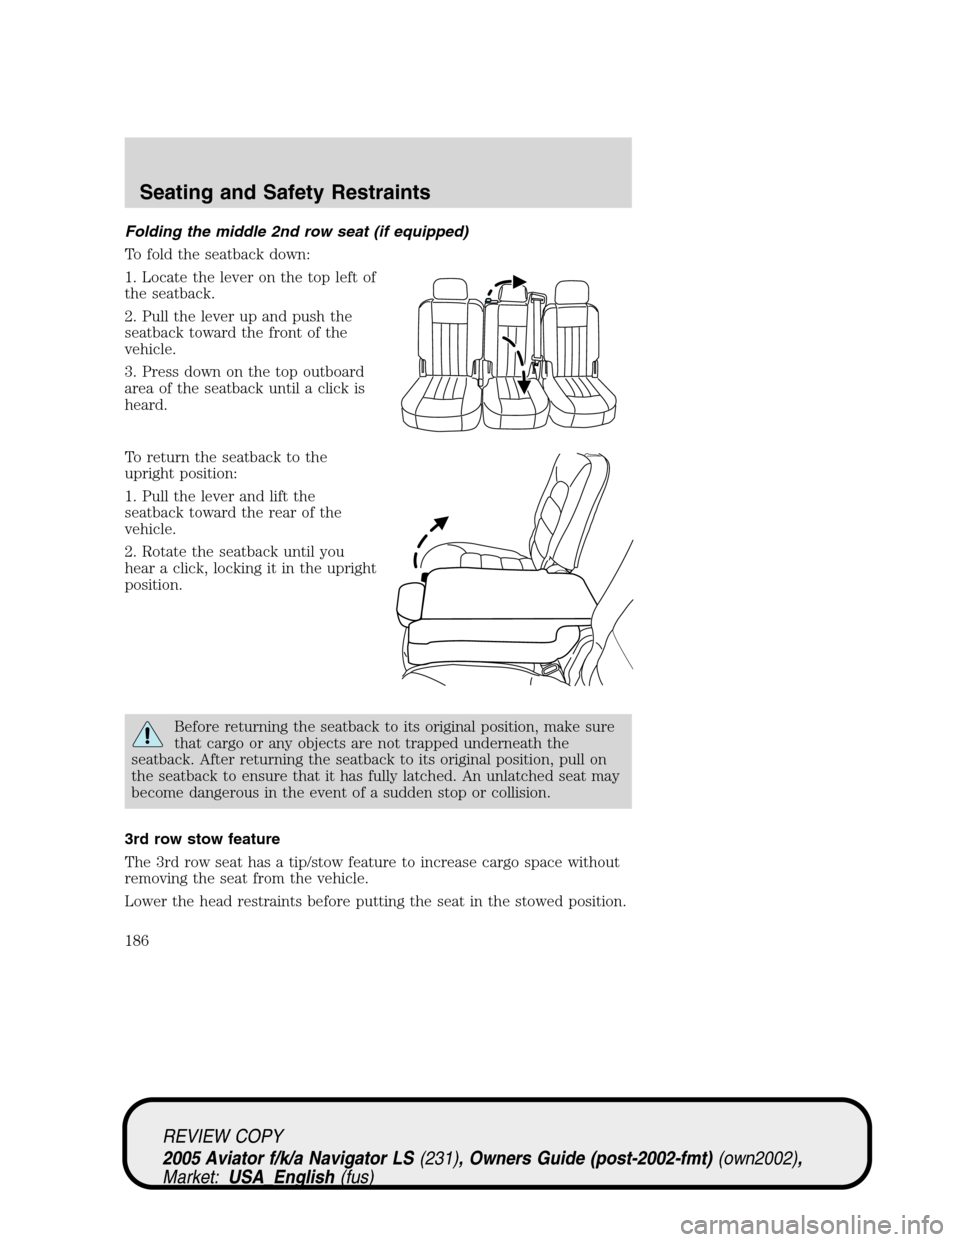 LINCOLN AVIATOR 2005 Owners Manual Folding the middle 2nd row seat (if equipped)
To fold the seatback down:
1. Locate the lever on the top left of
the seatback.
2. Pull the lever up and push the
seatback toward the front of the
vehicle